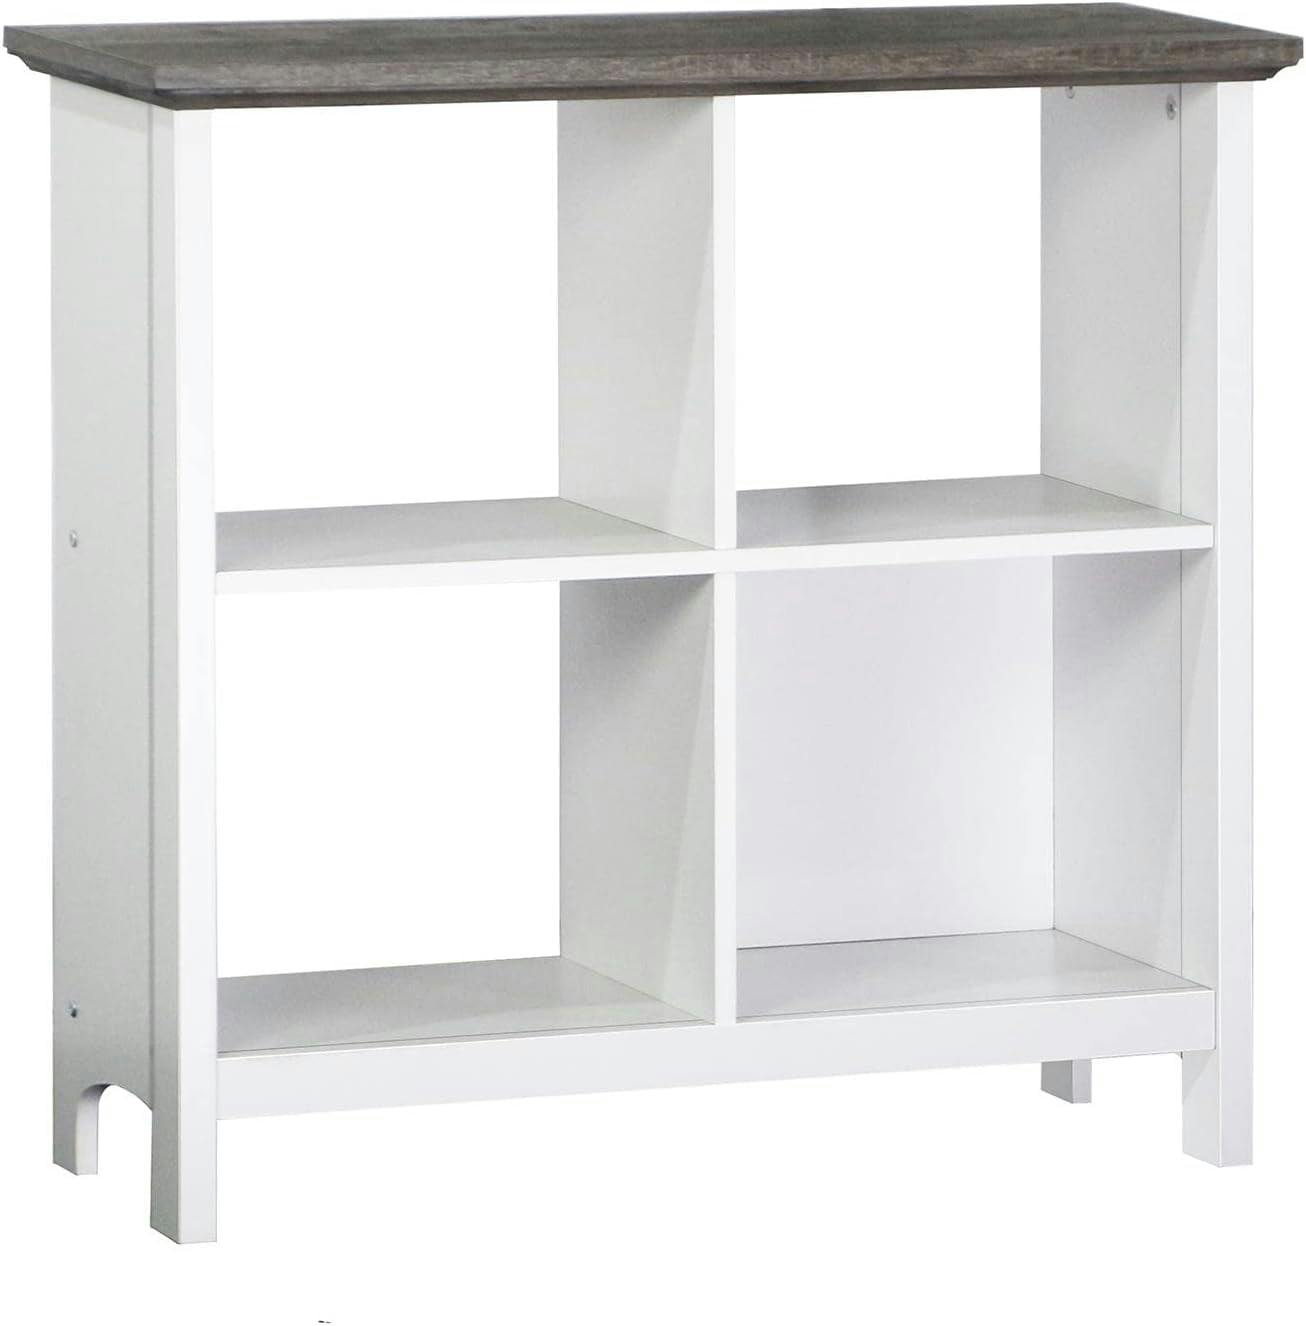 Olivia Gray Oak and White 4-Cube Wooden Bookcase